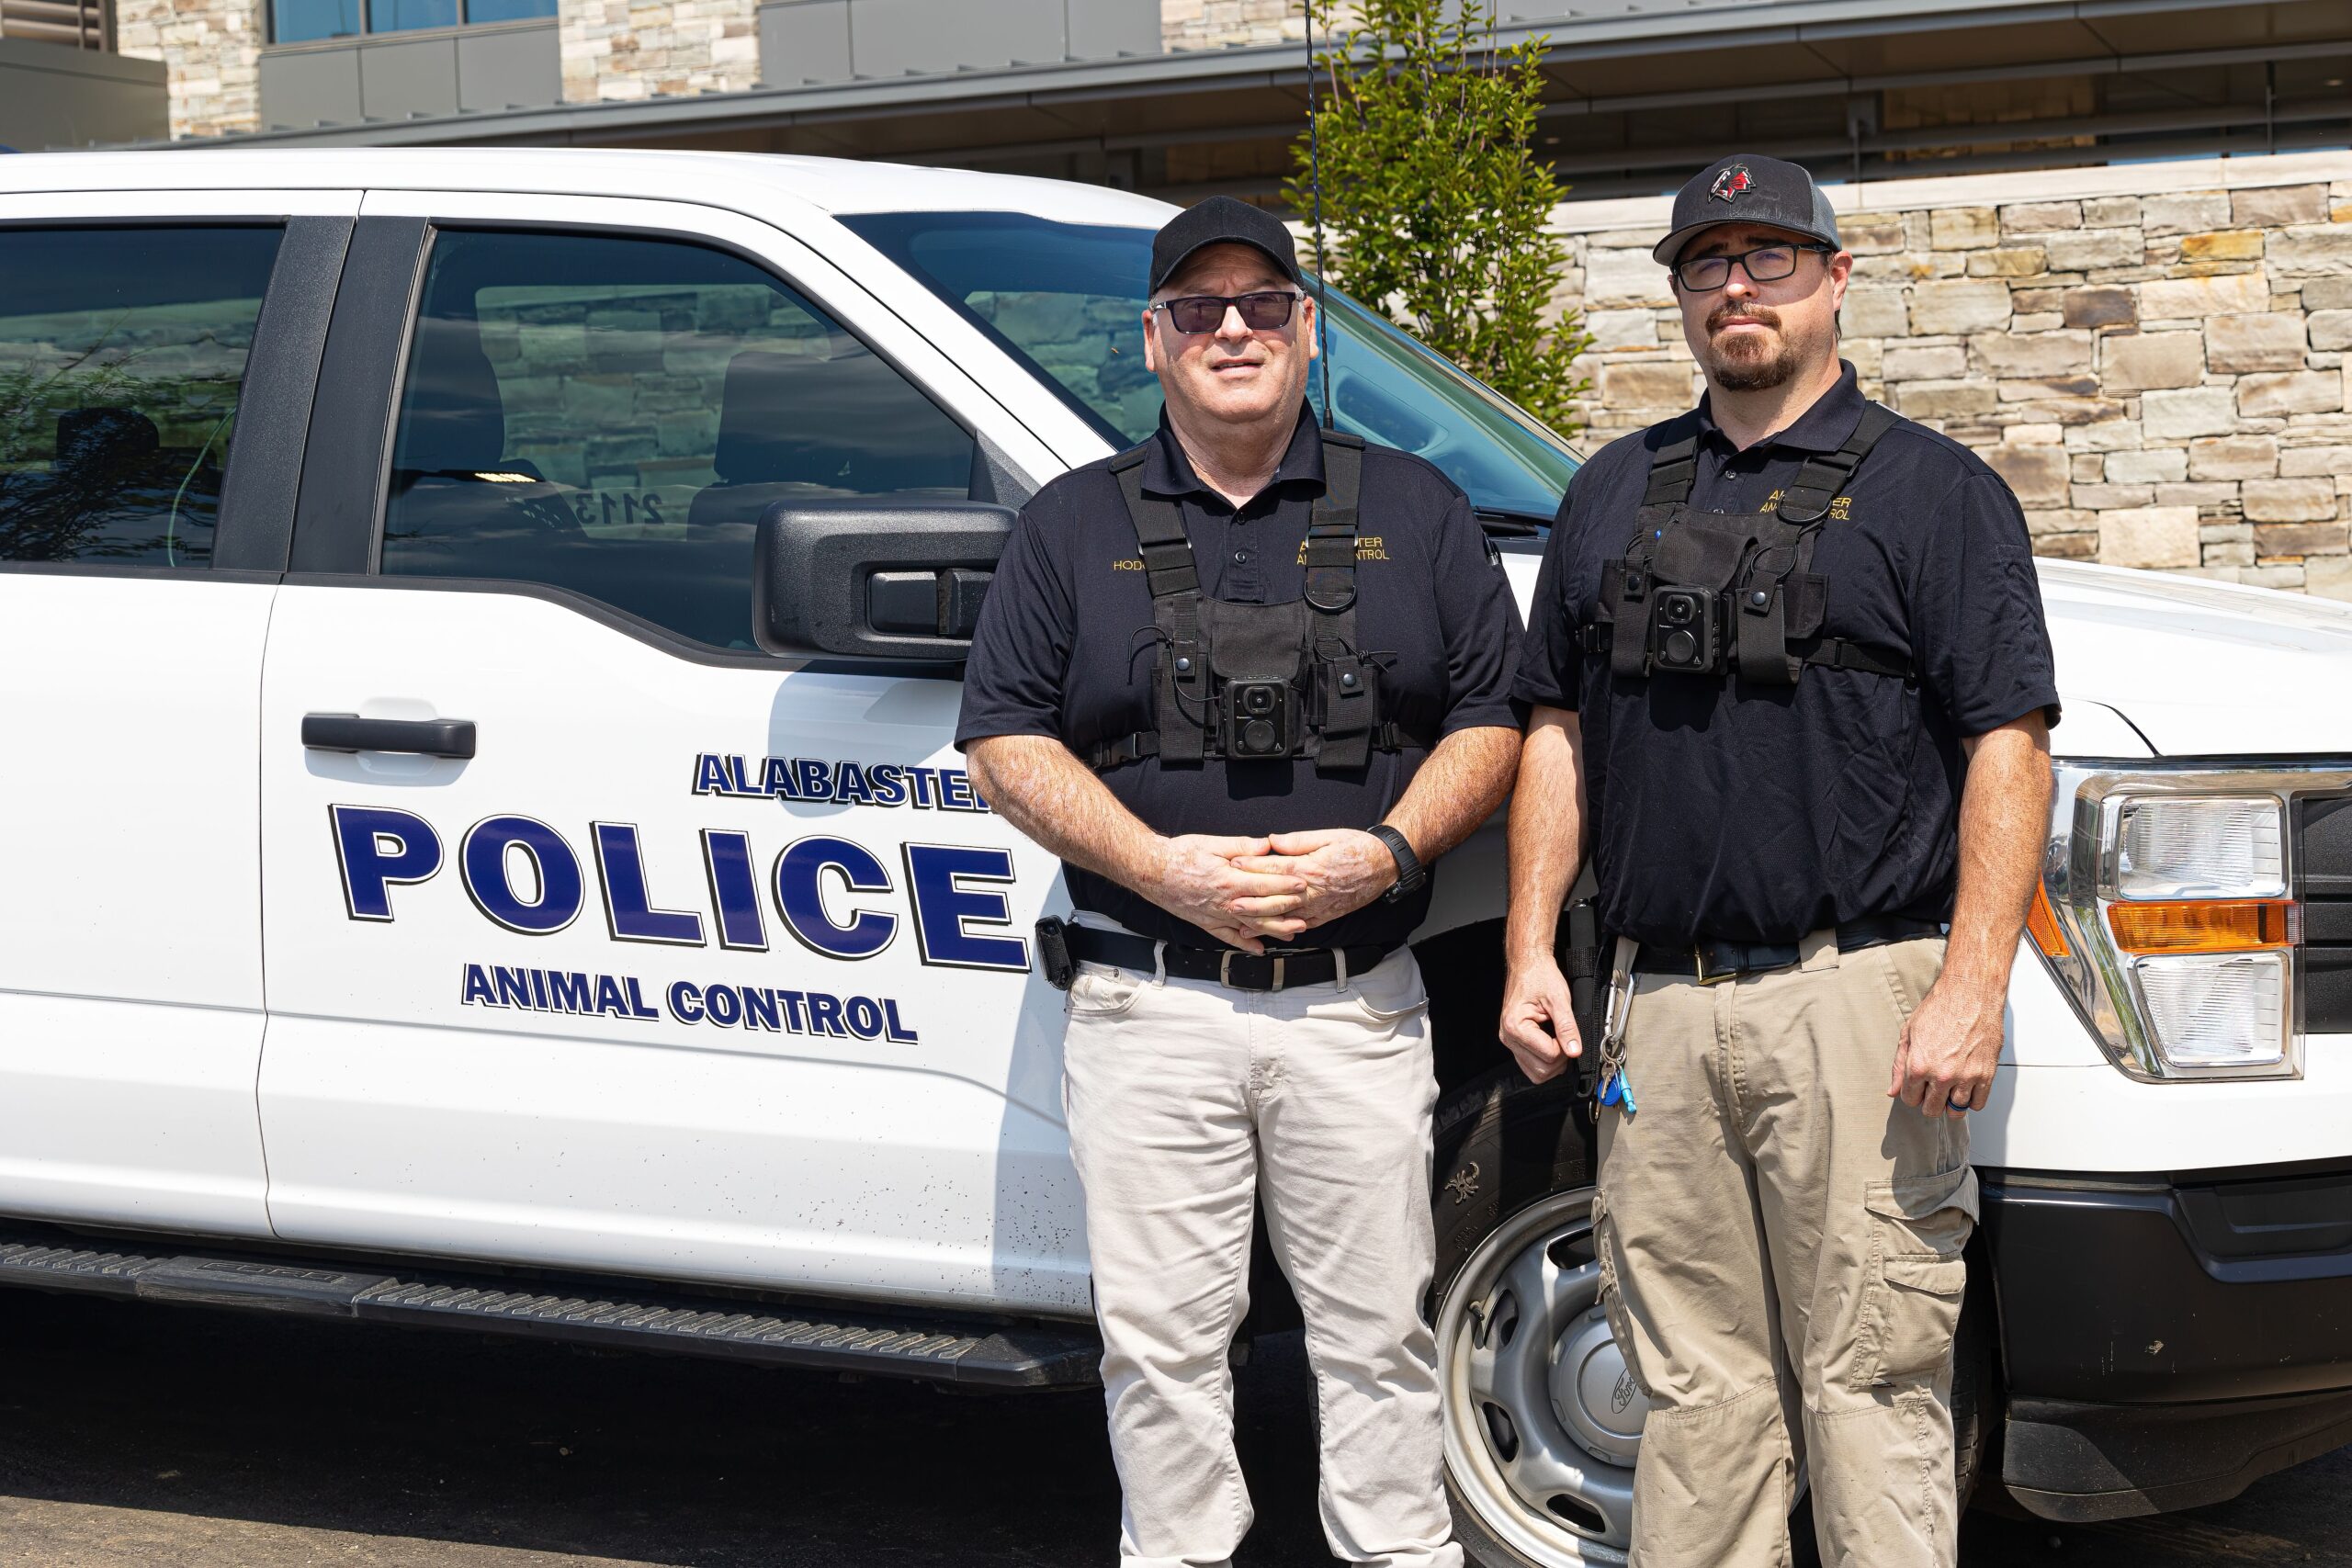 A Conversation With Animal Control Officers Hoyet Hodgens and Zachary Payne